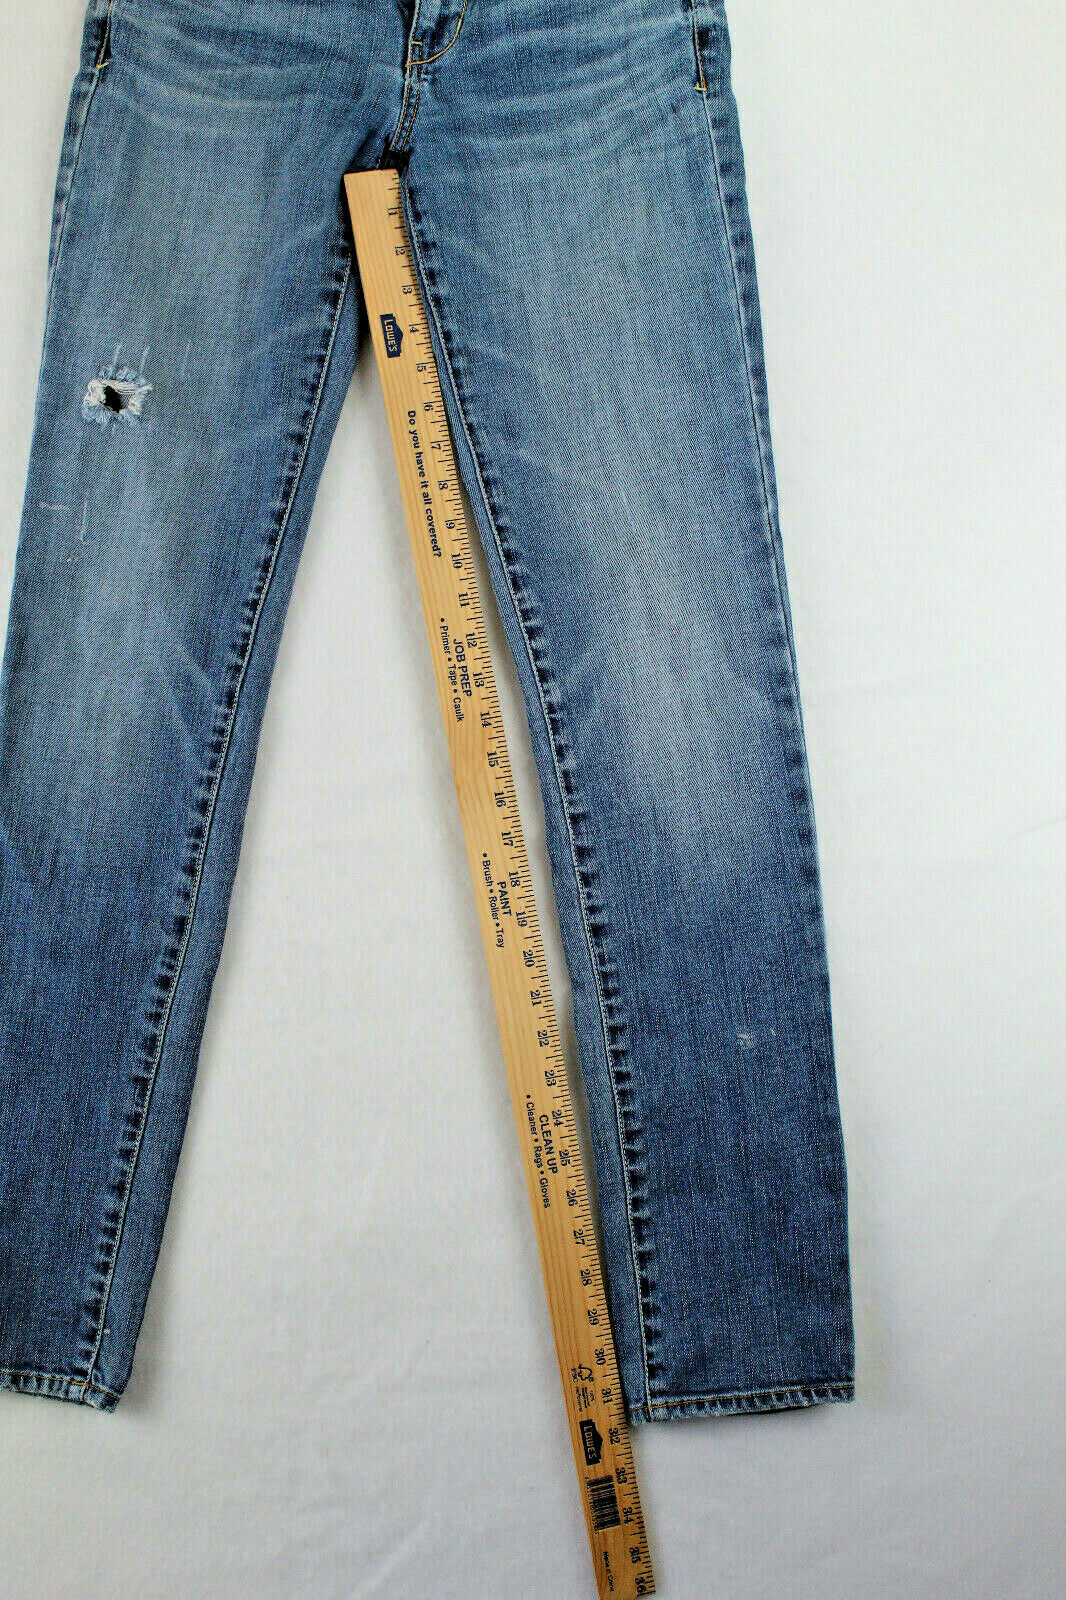 American Eagle Women's Stretch Jeans Size 4 Long - Low Rise Distressed Denim